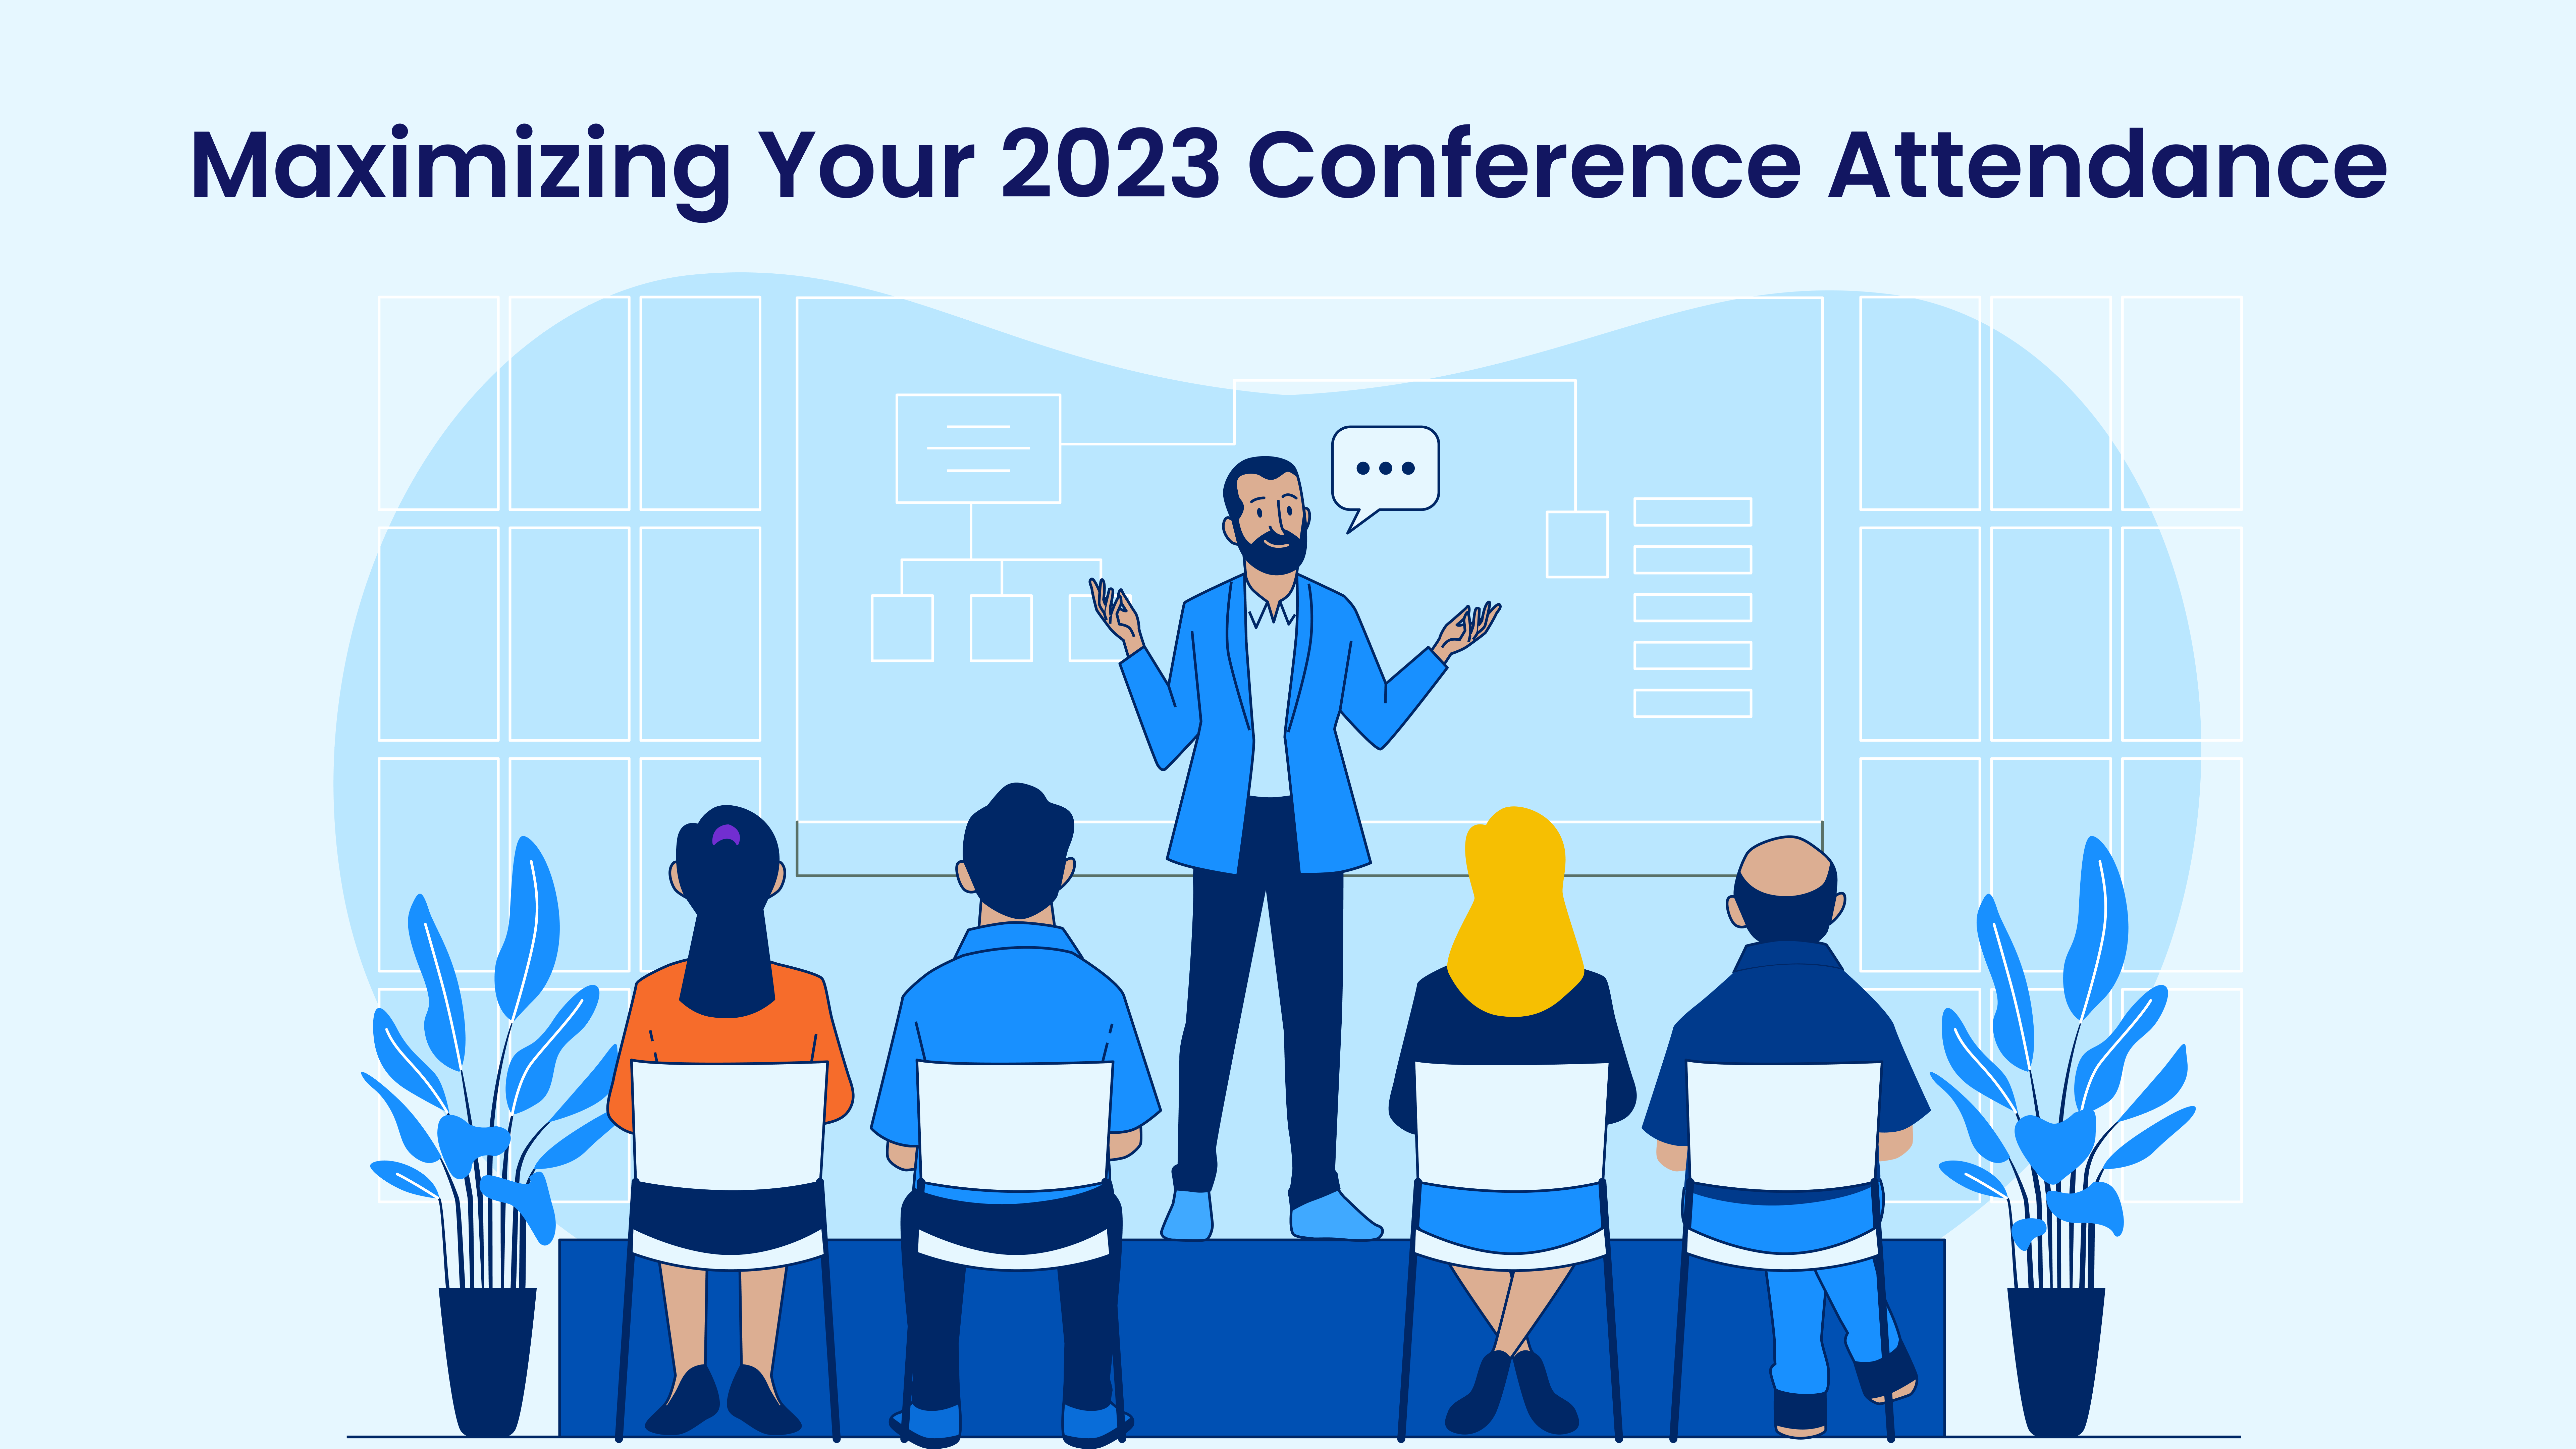 Planning Your 2023 Conference Schedule: So Many Events, So Little Time